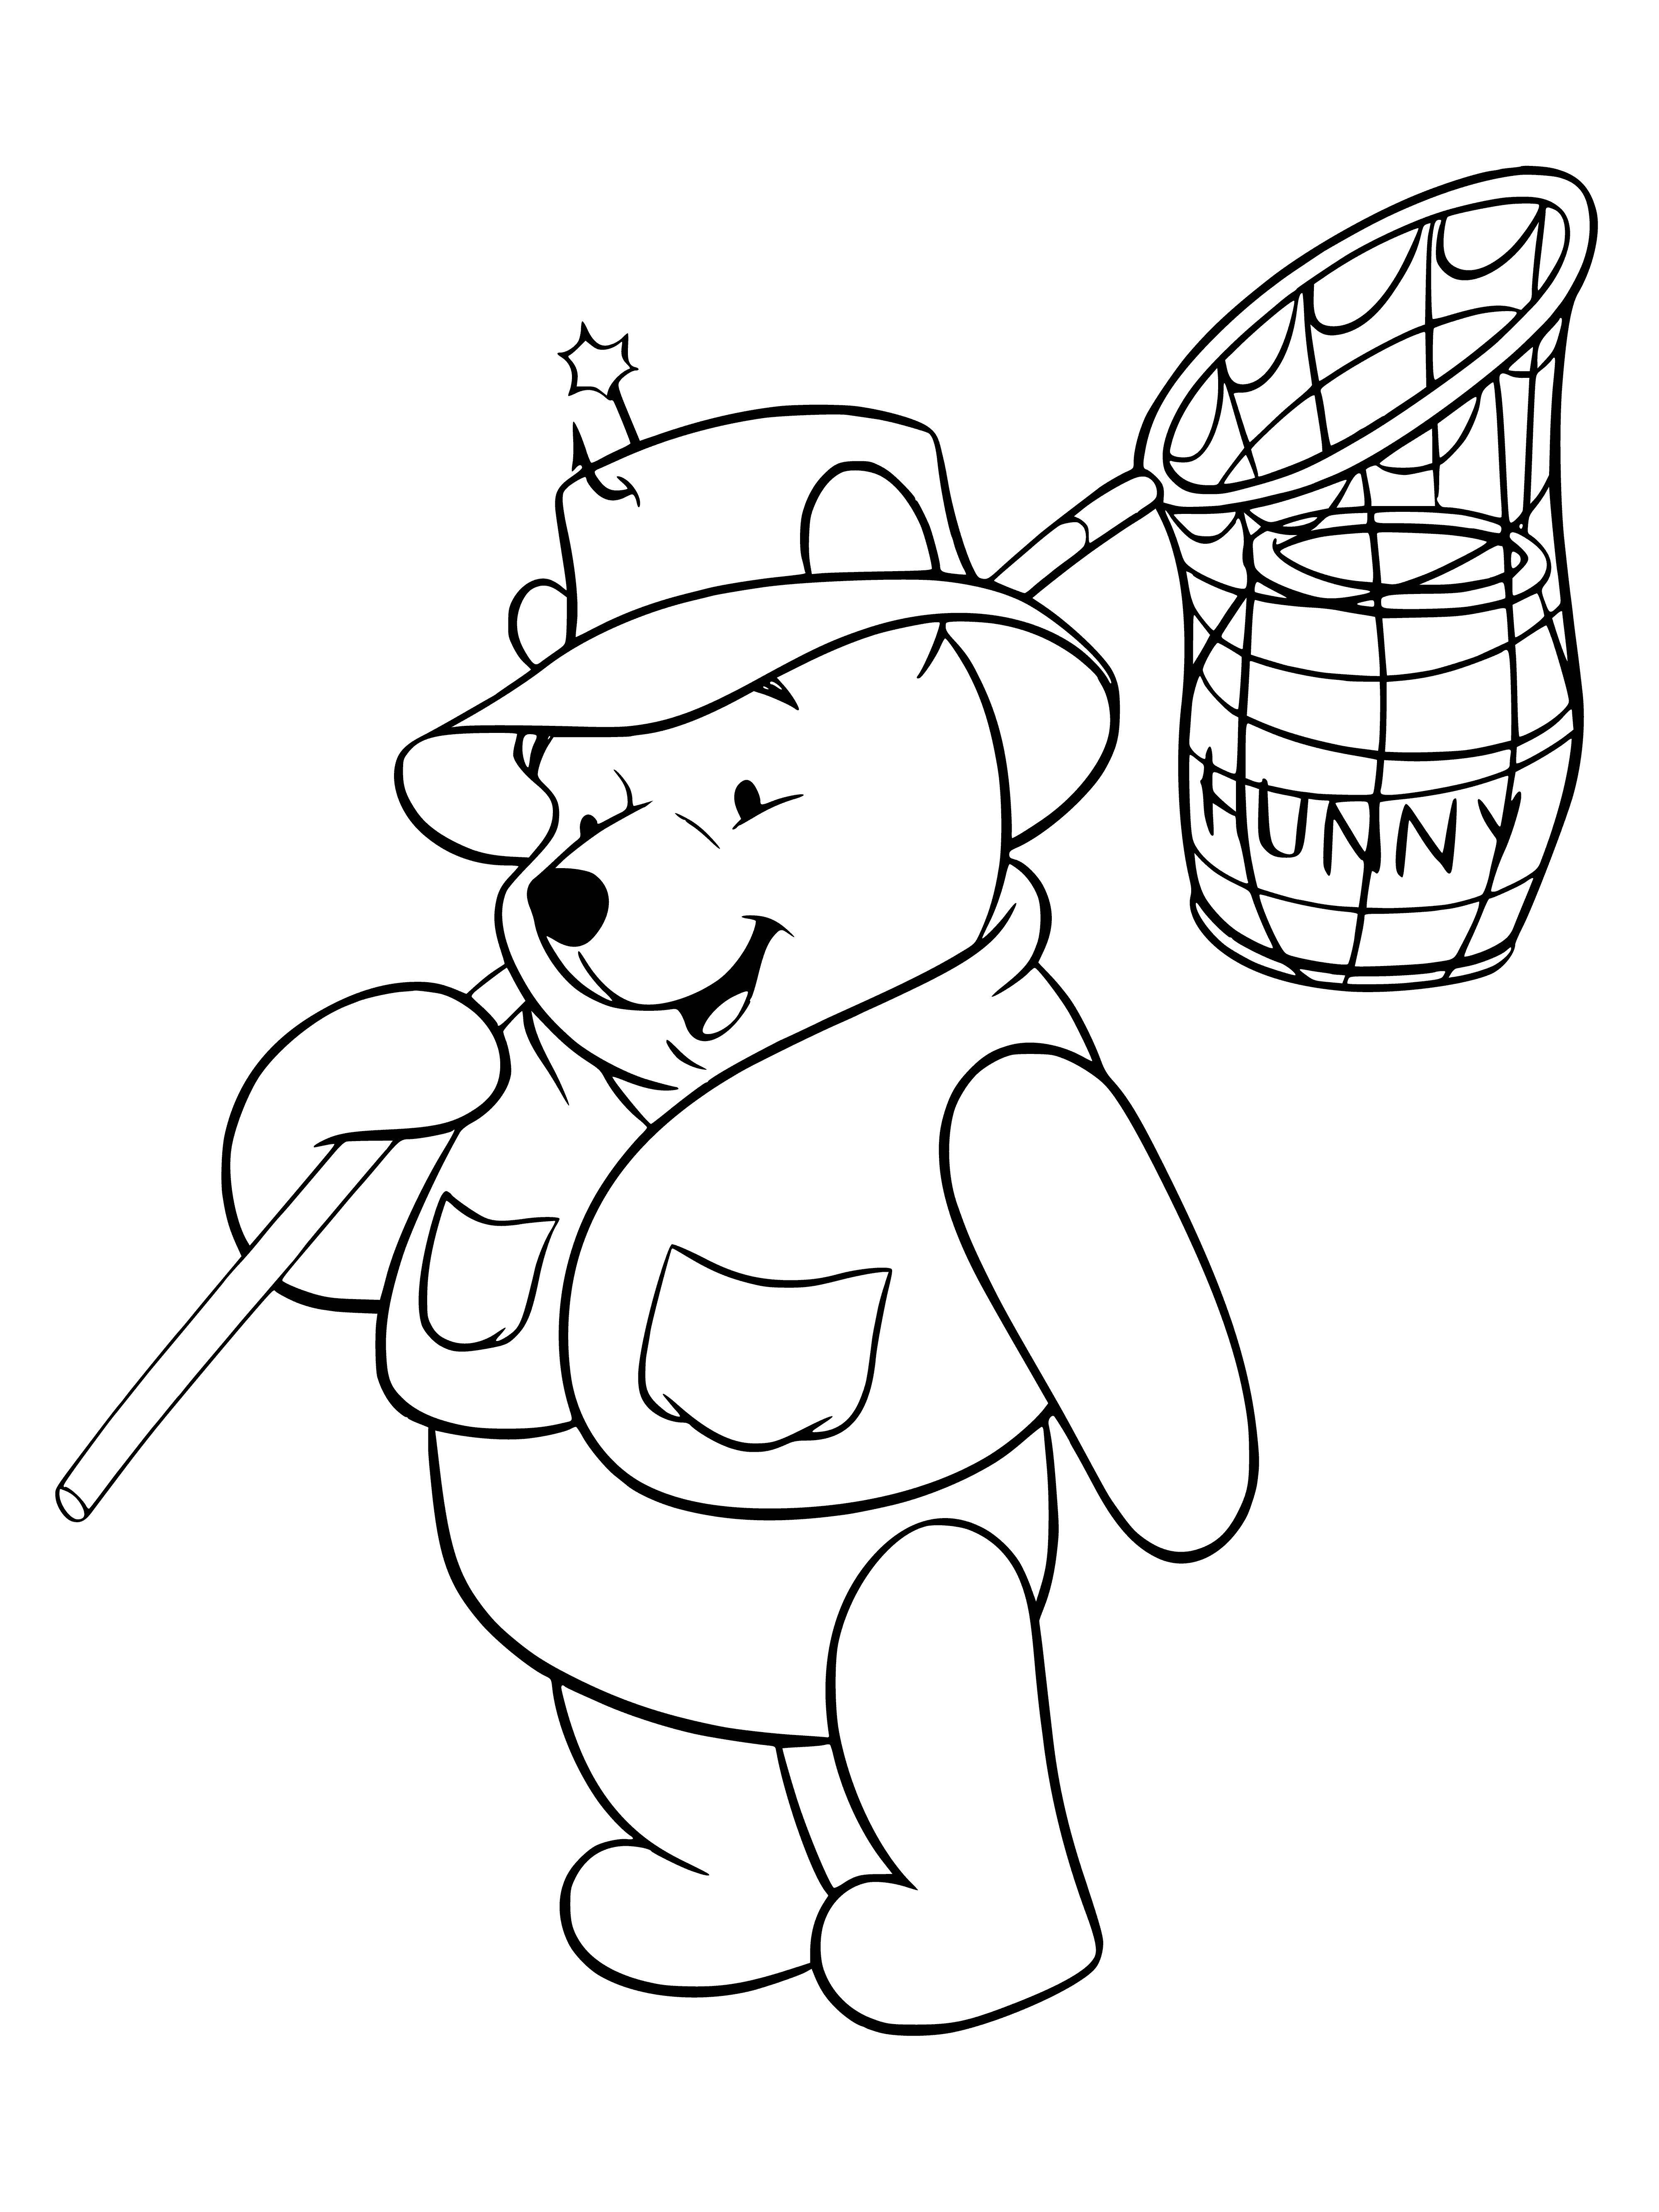 coloring page: Cartoon bear walking through a forest carrying a jar of honey surrounded by trees and flowers.